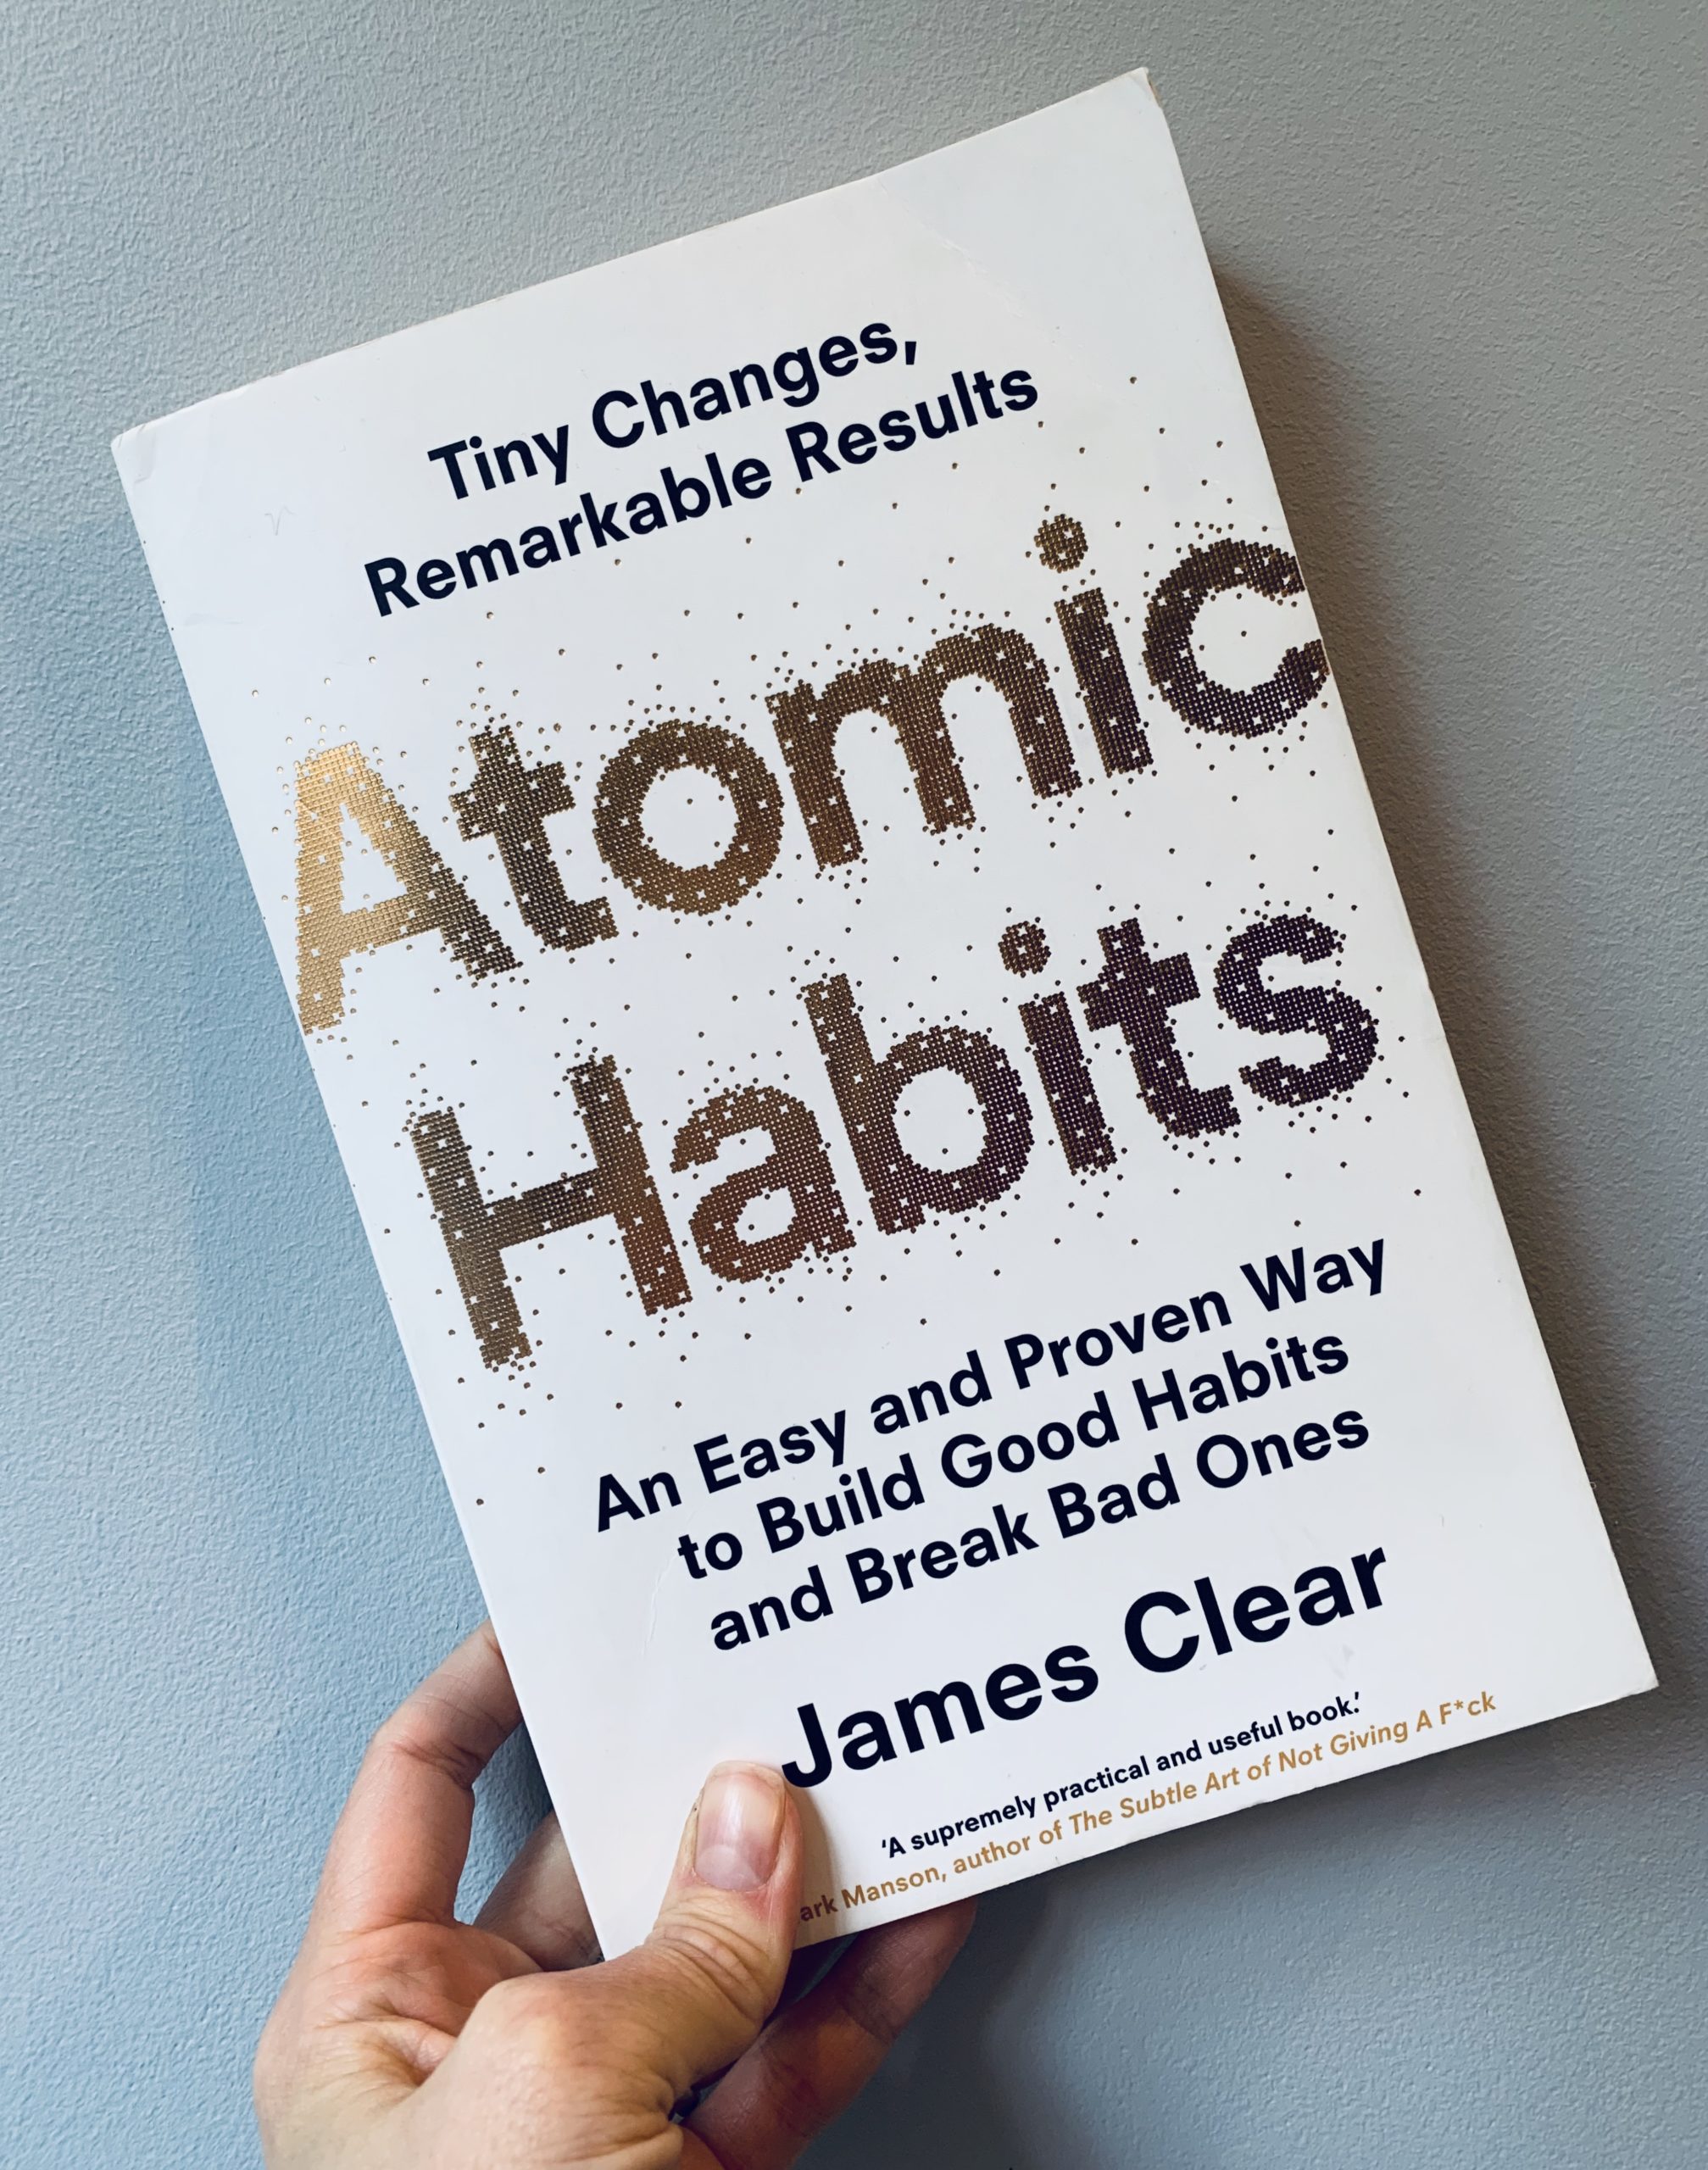 Atomic Habits download the last version for ipod